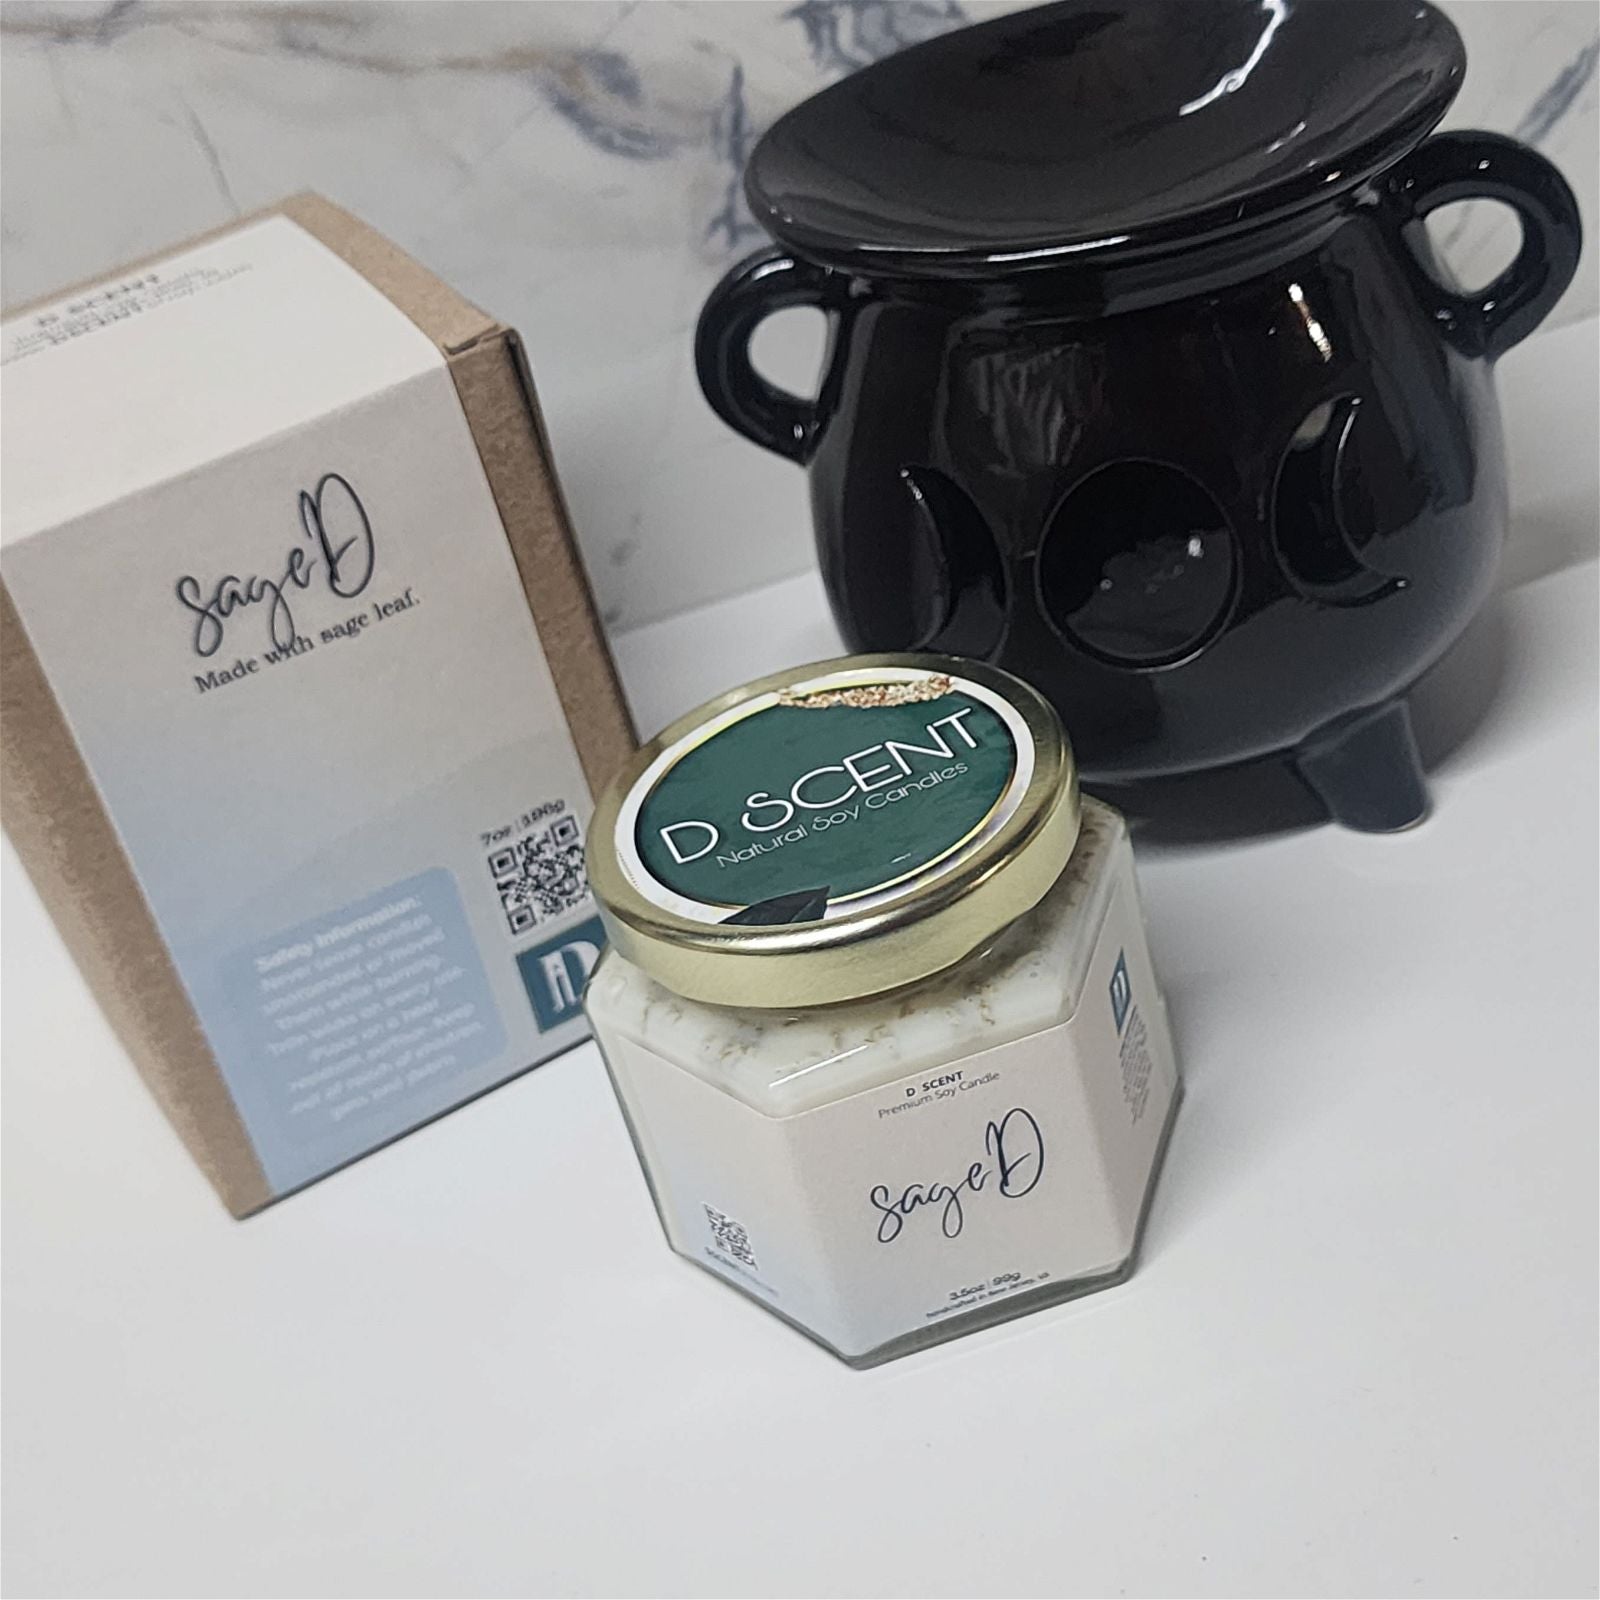 sageD Soy Candle | Small Hex Jar - D SCENT 